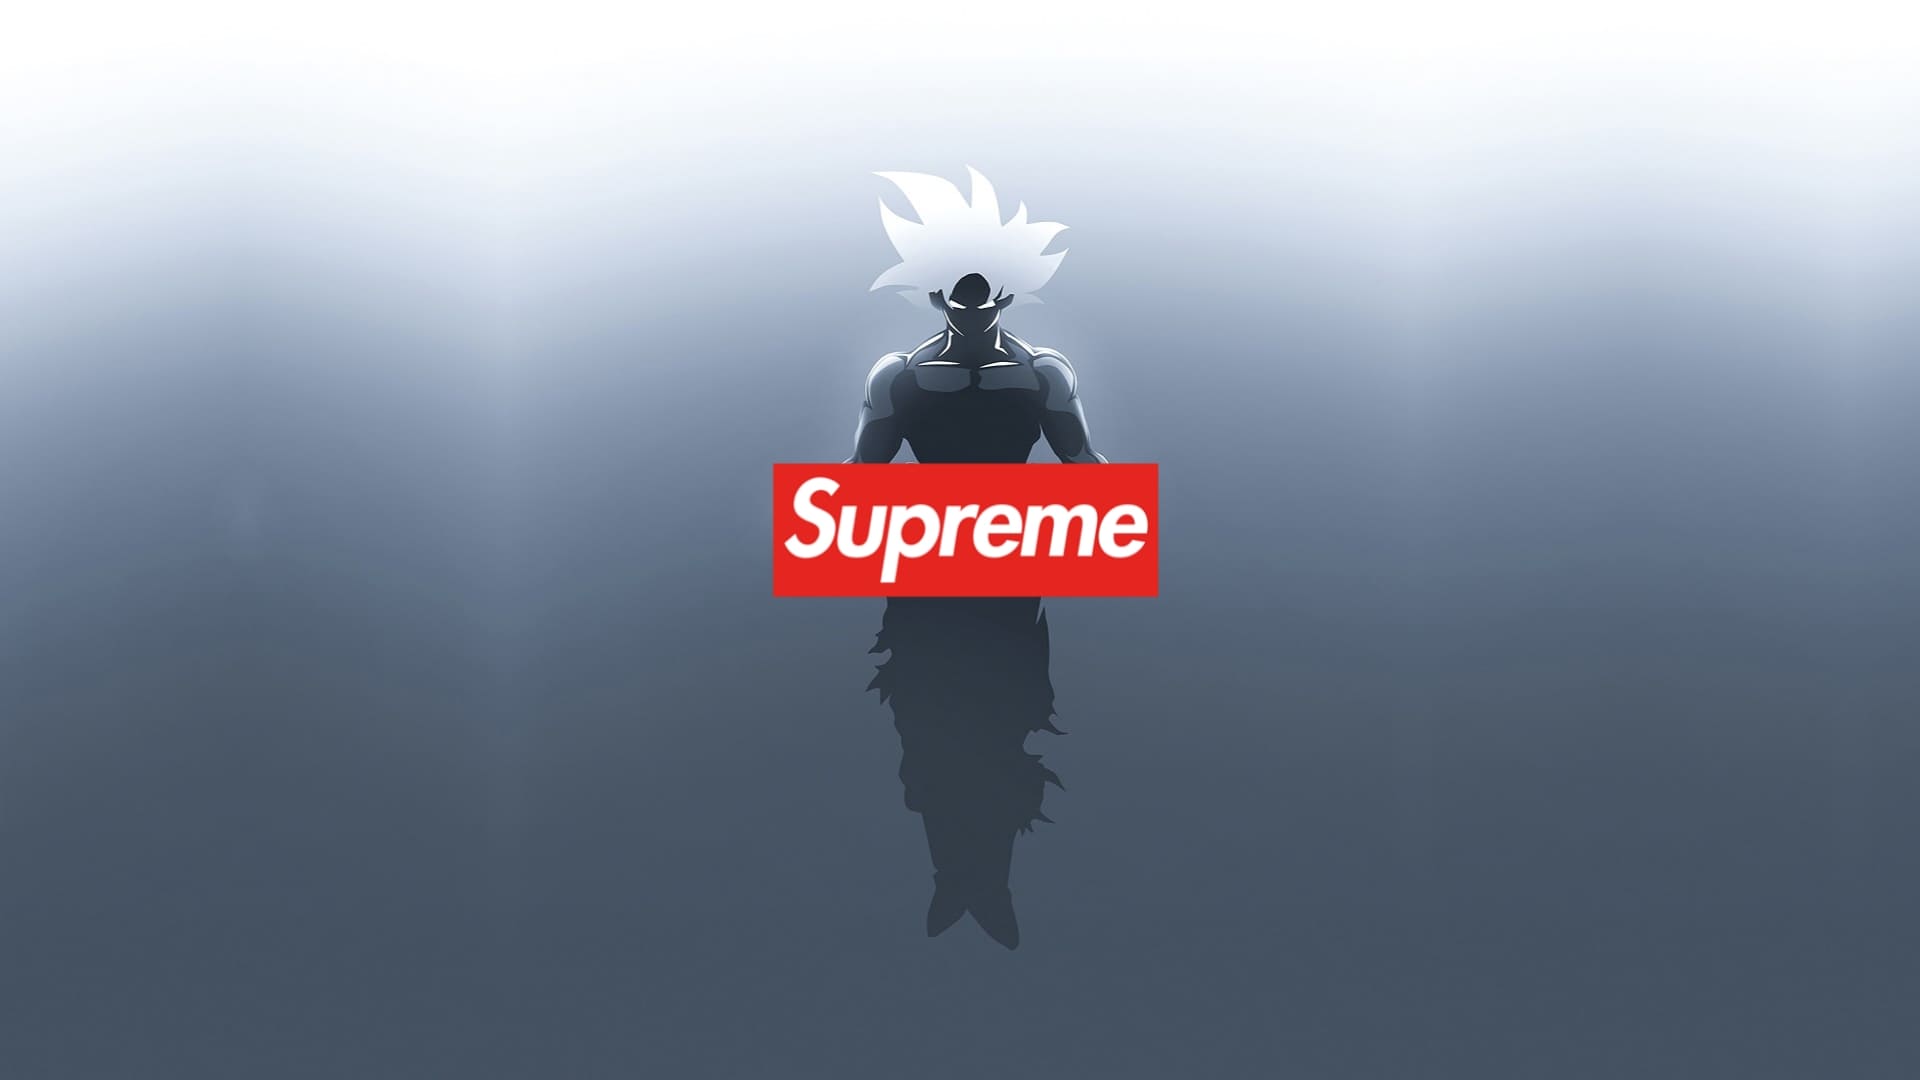 supreme drippy wallpapers supremewallpapers foryou foryoupage f   TikTok